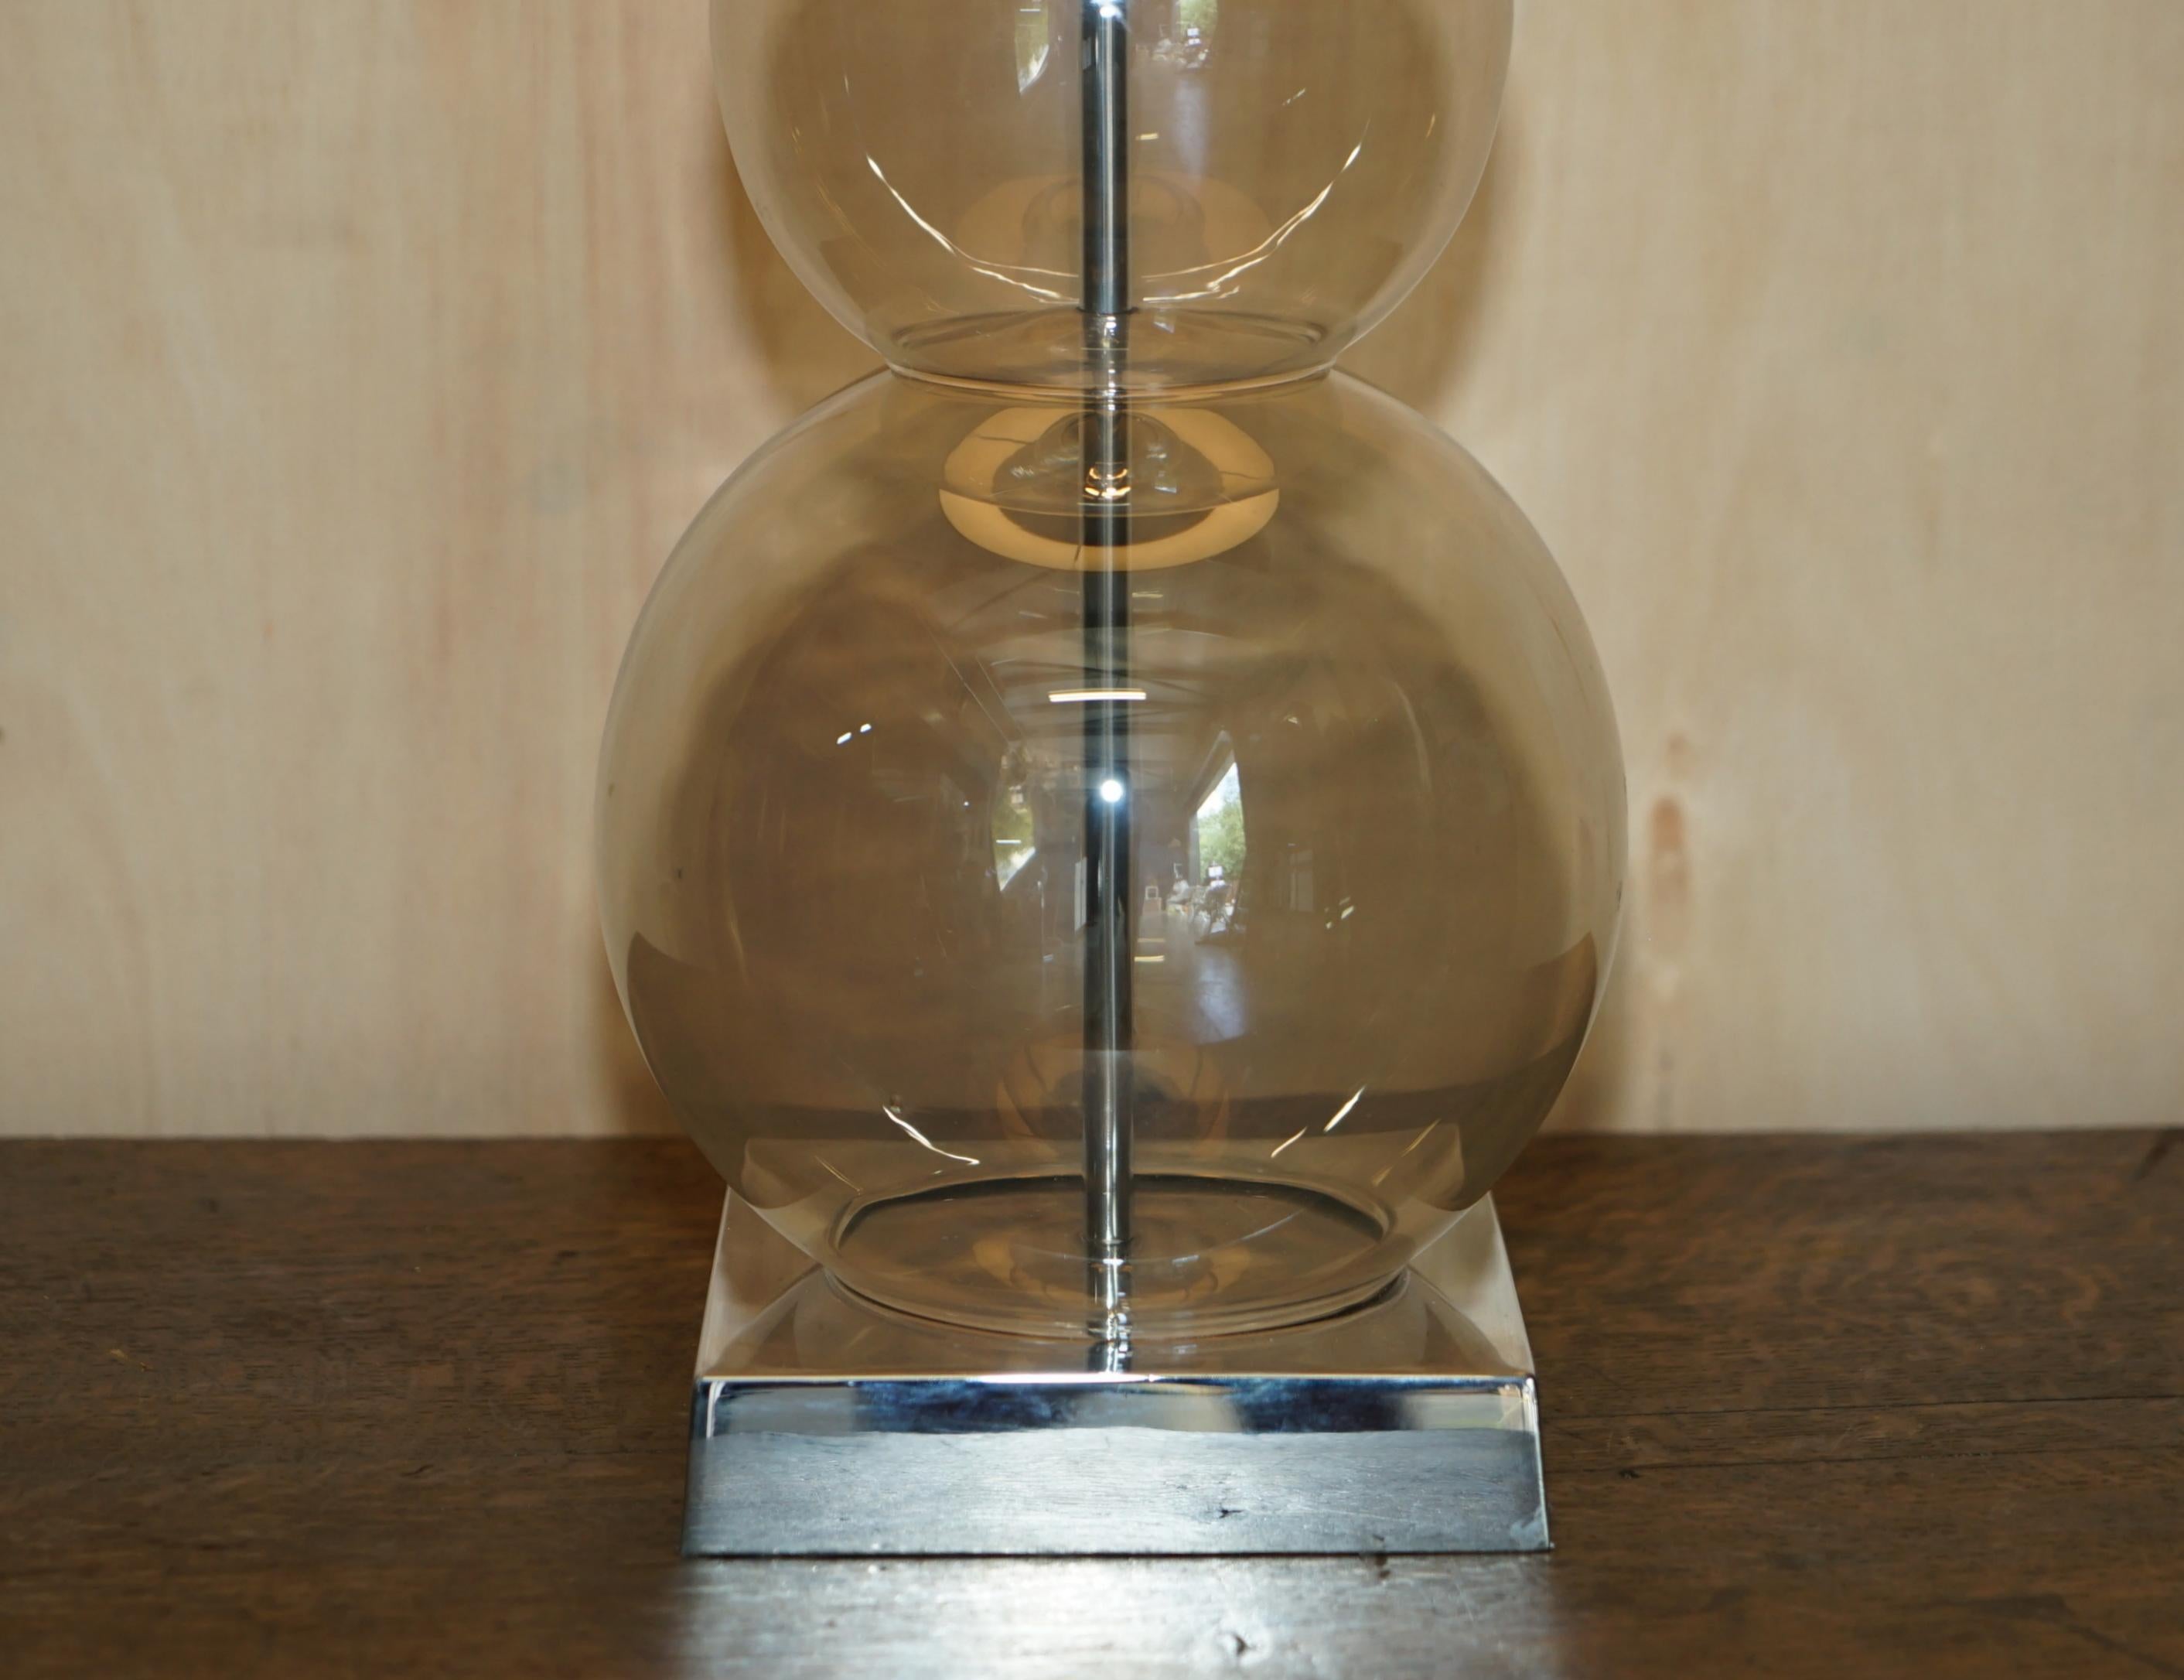 Glass Pair of Heathfield & Co Opera 3 Ball Table Lamps with Original Shades